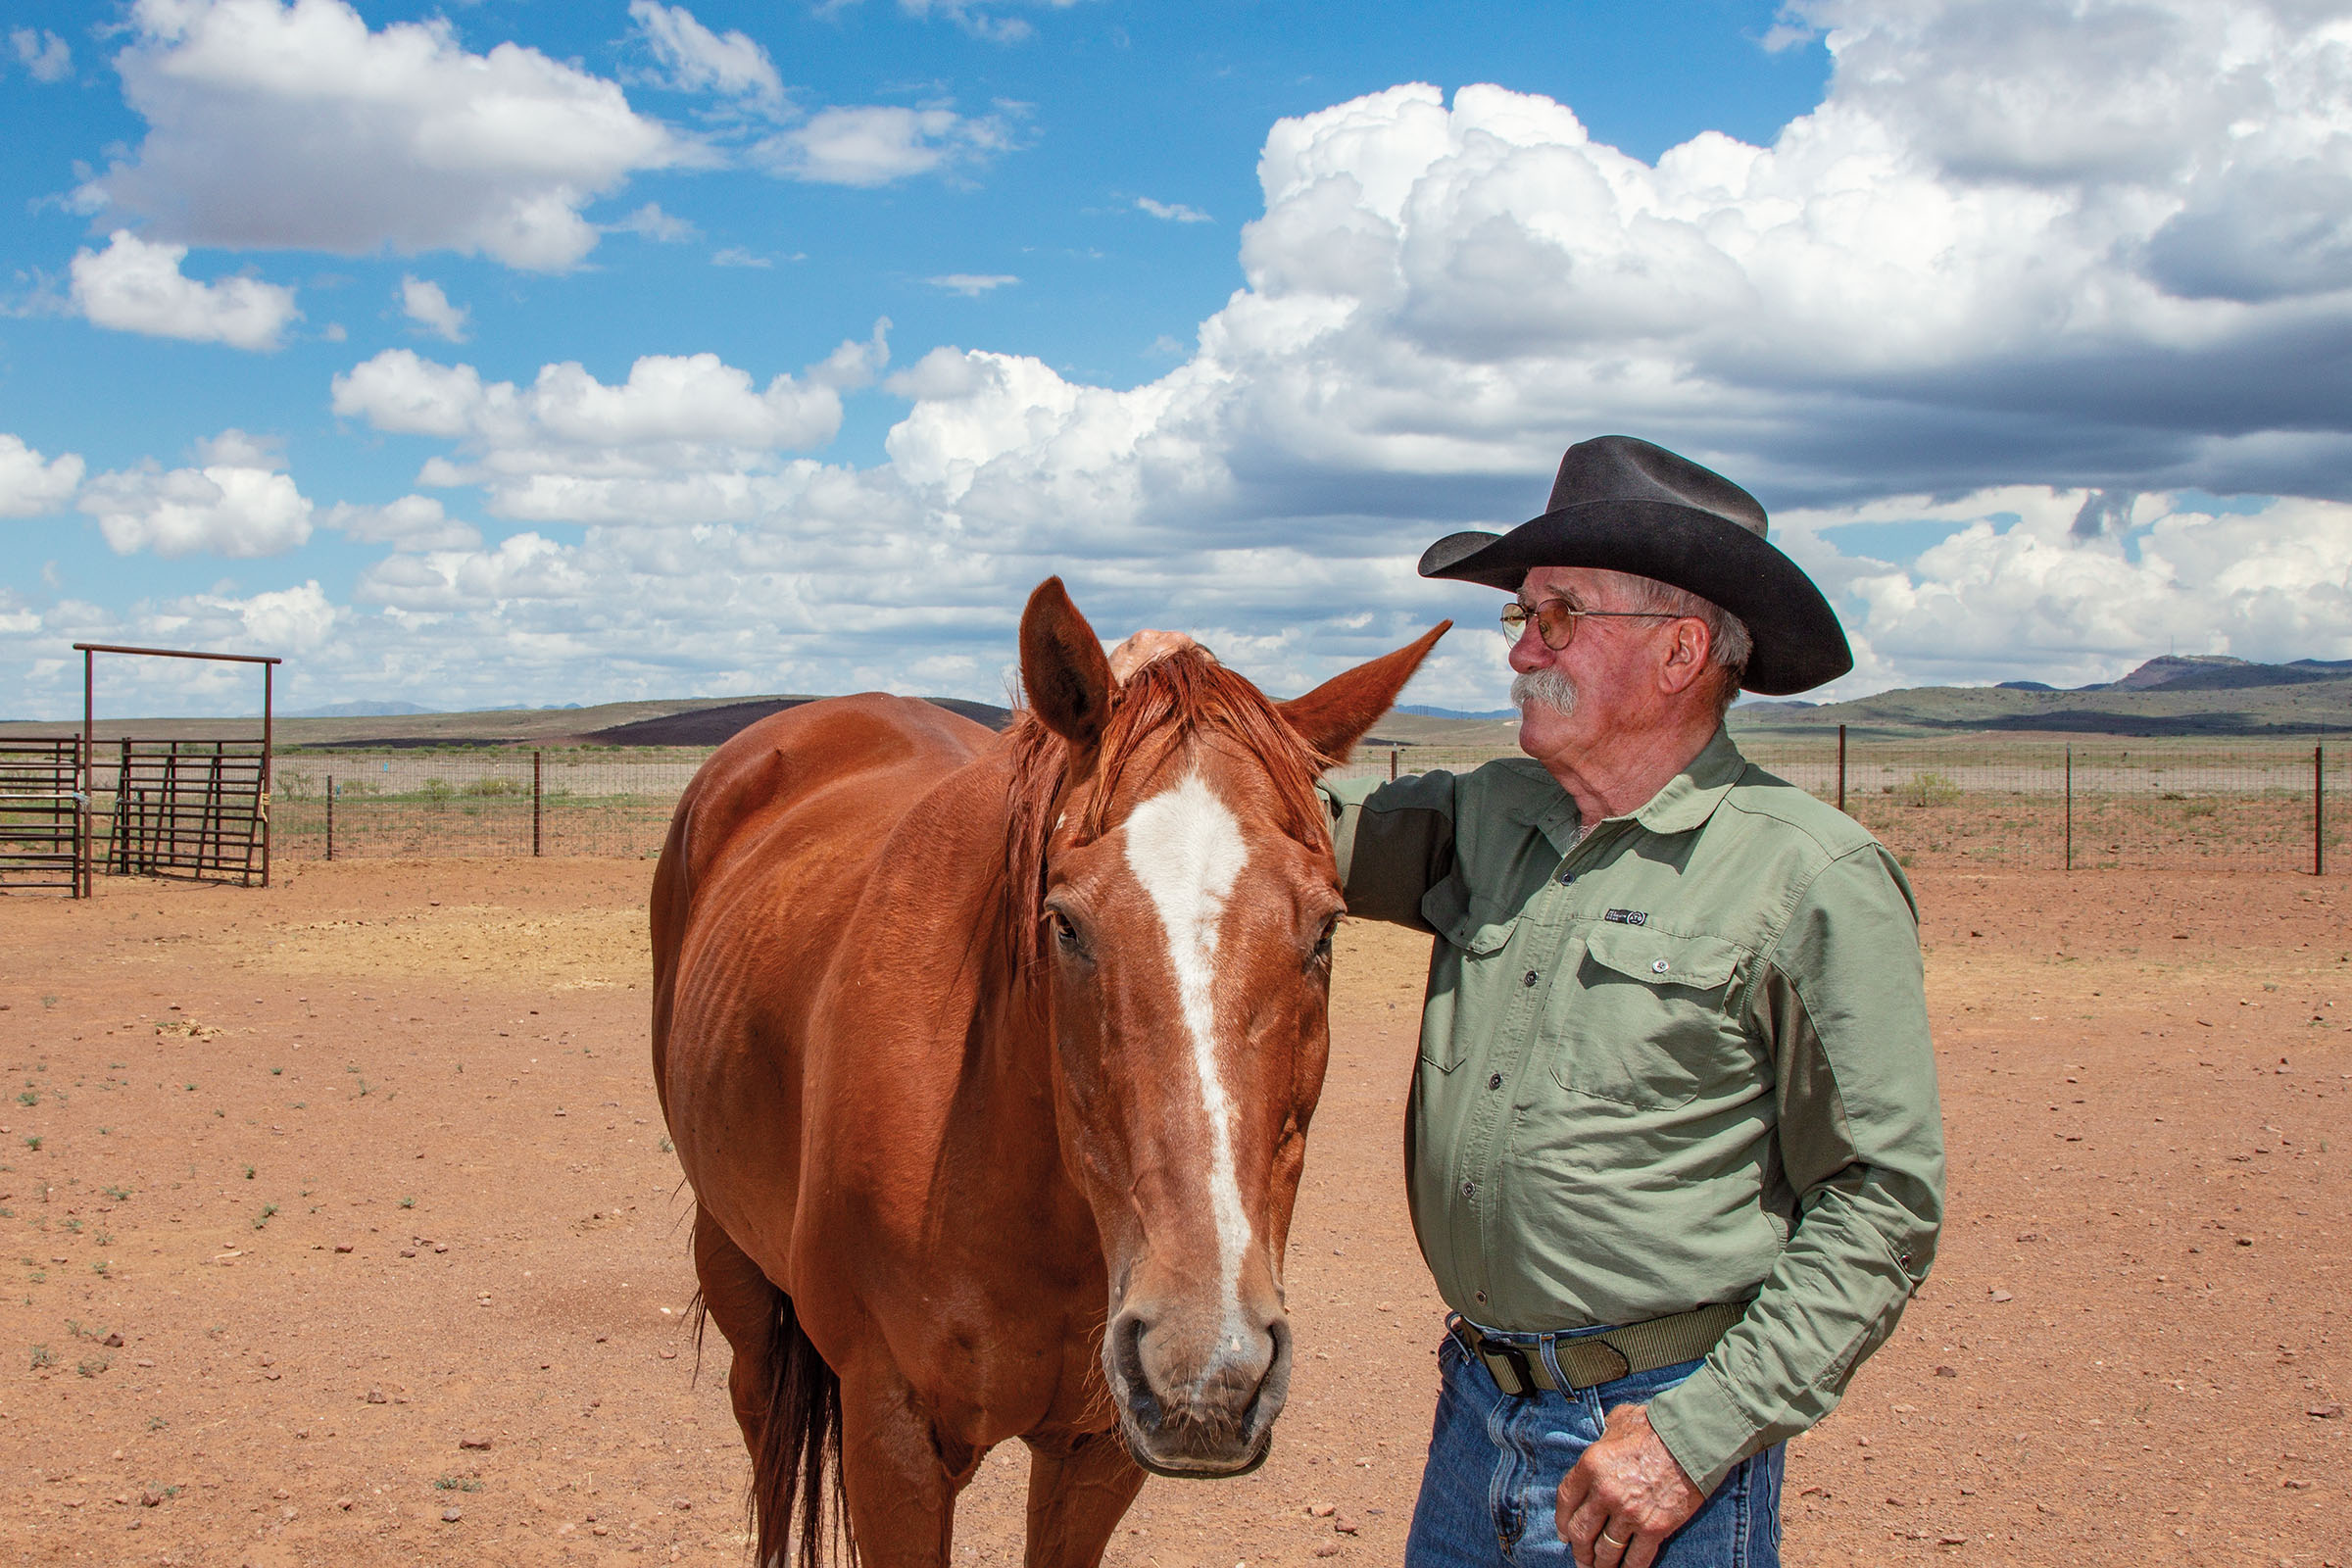 A man in a green shirt and black cowboy hat pets a horse in a dirt landscape